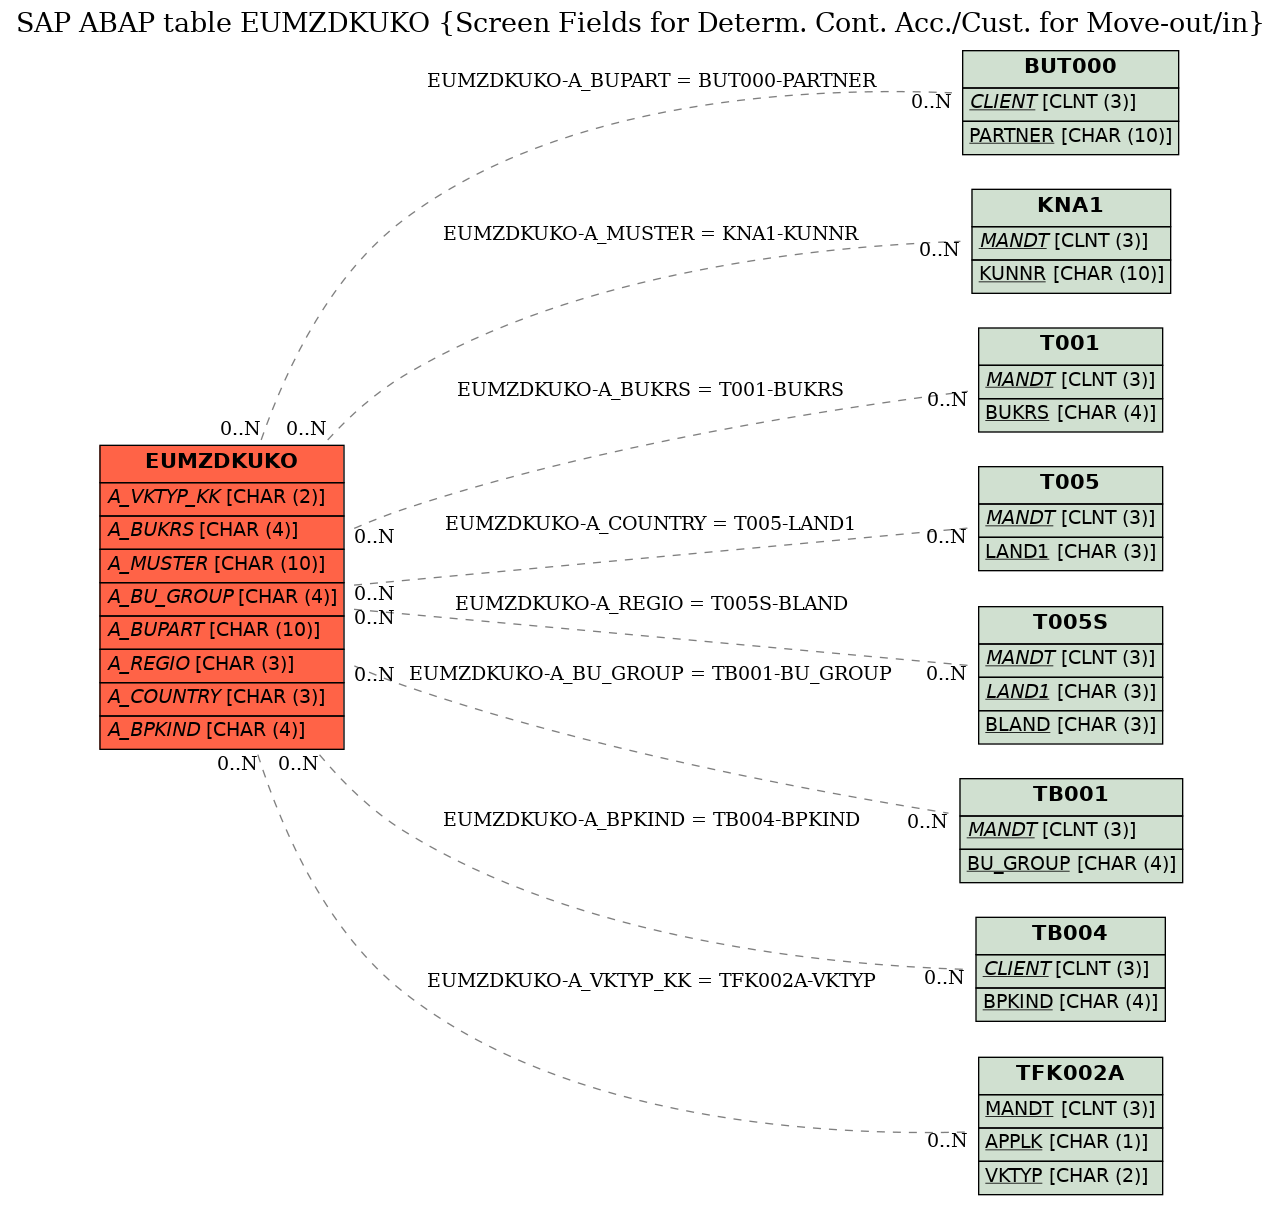 E-R Diagram for table EUMZDKUKO (Screen Fields for Determ. Cont. Acc./Cust. for Move-out/in)